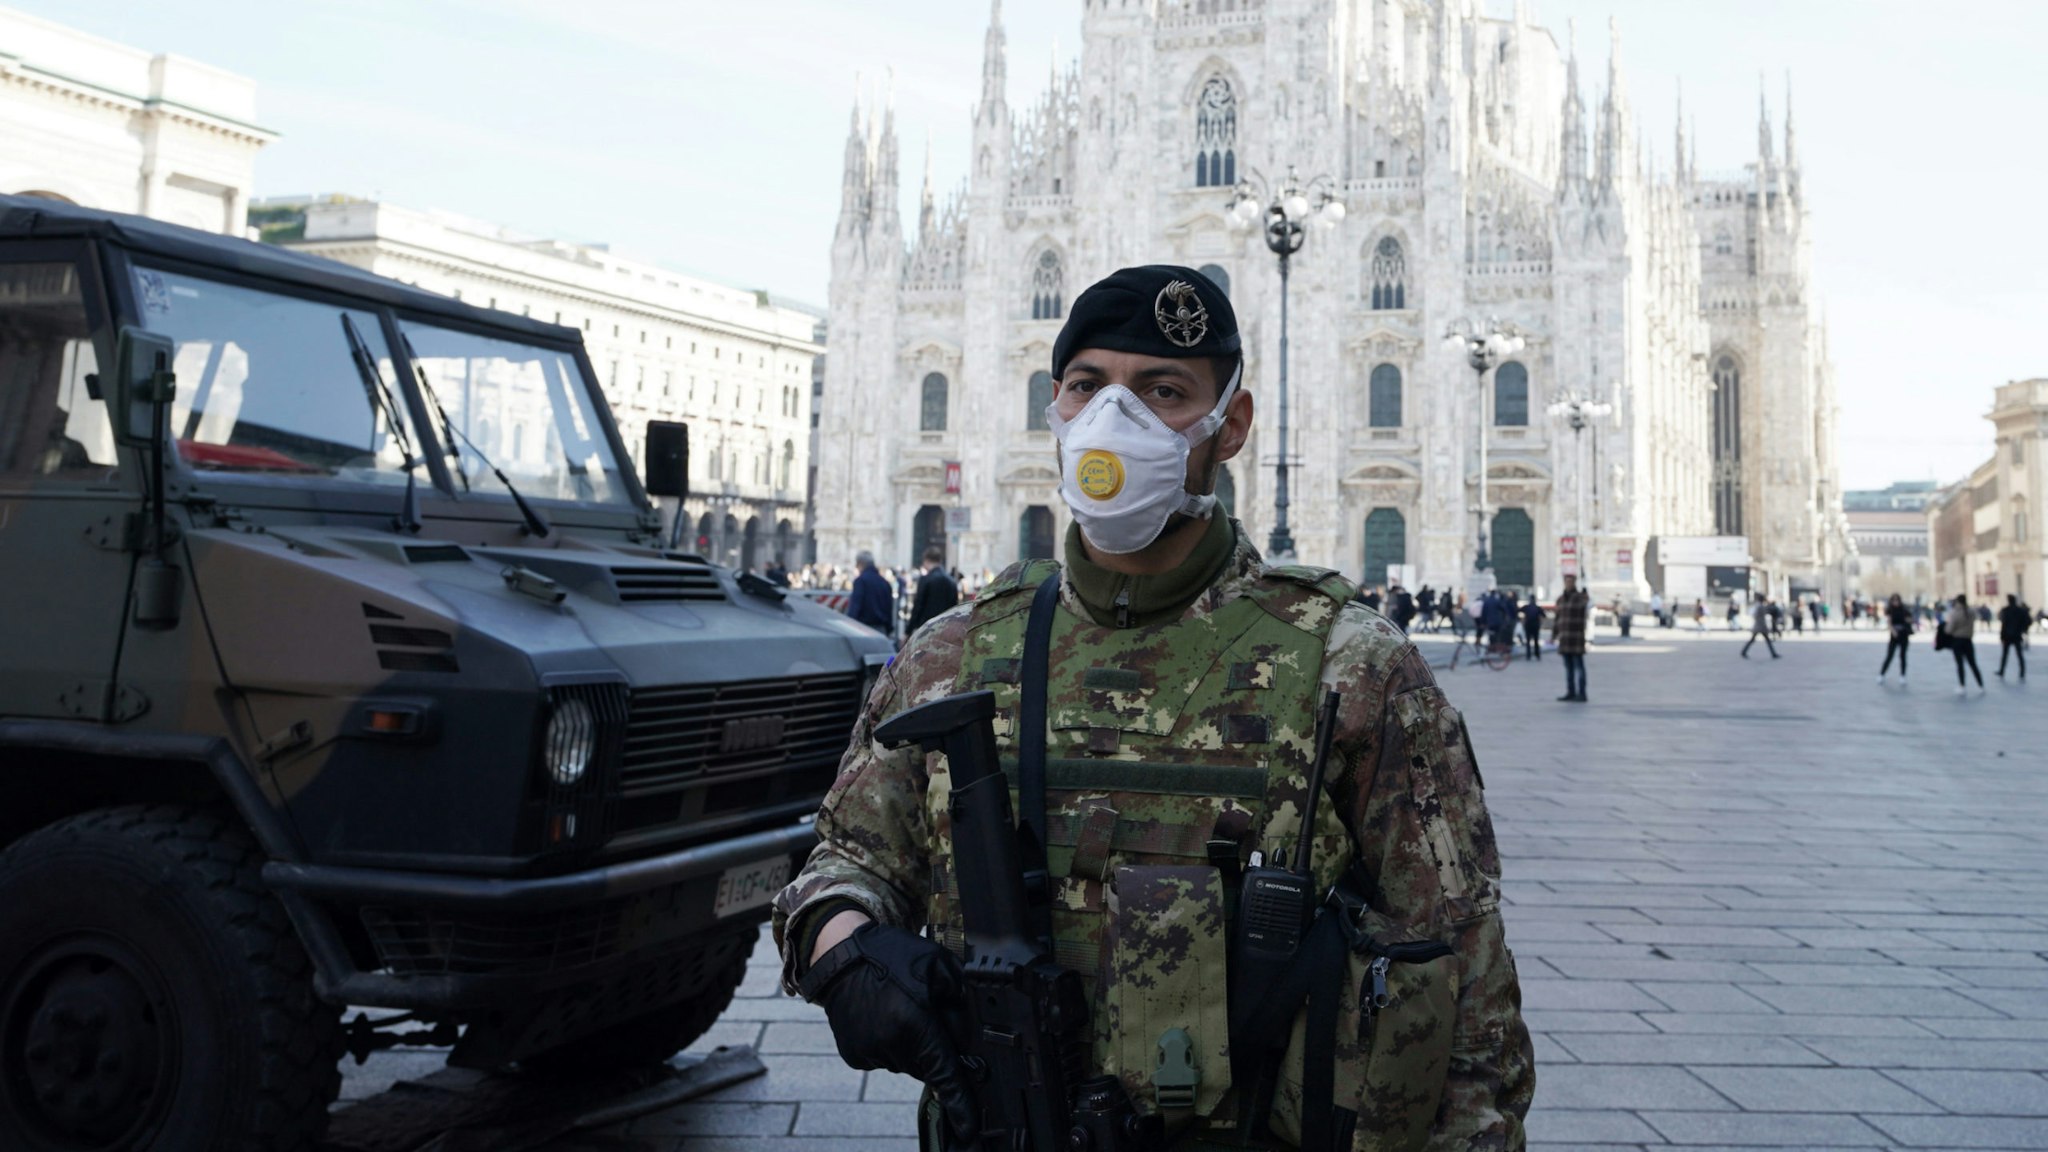 An Italian soldier is wearing a fpp3 mask in Duomo Square on February 24, 2020 in Milan, Italy. Italian government takes security measures in Lombardy Region to counter the spread of the COVID-19 coronavirus.